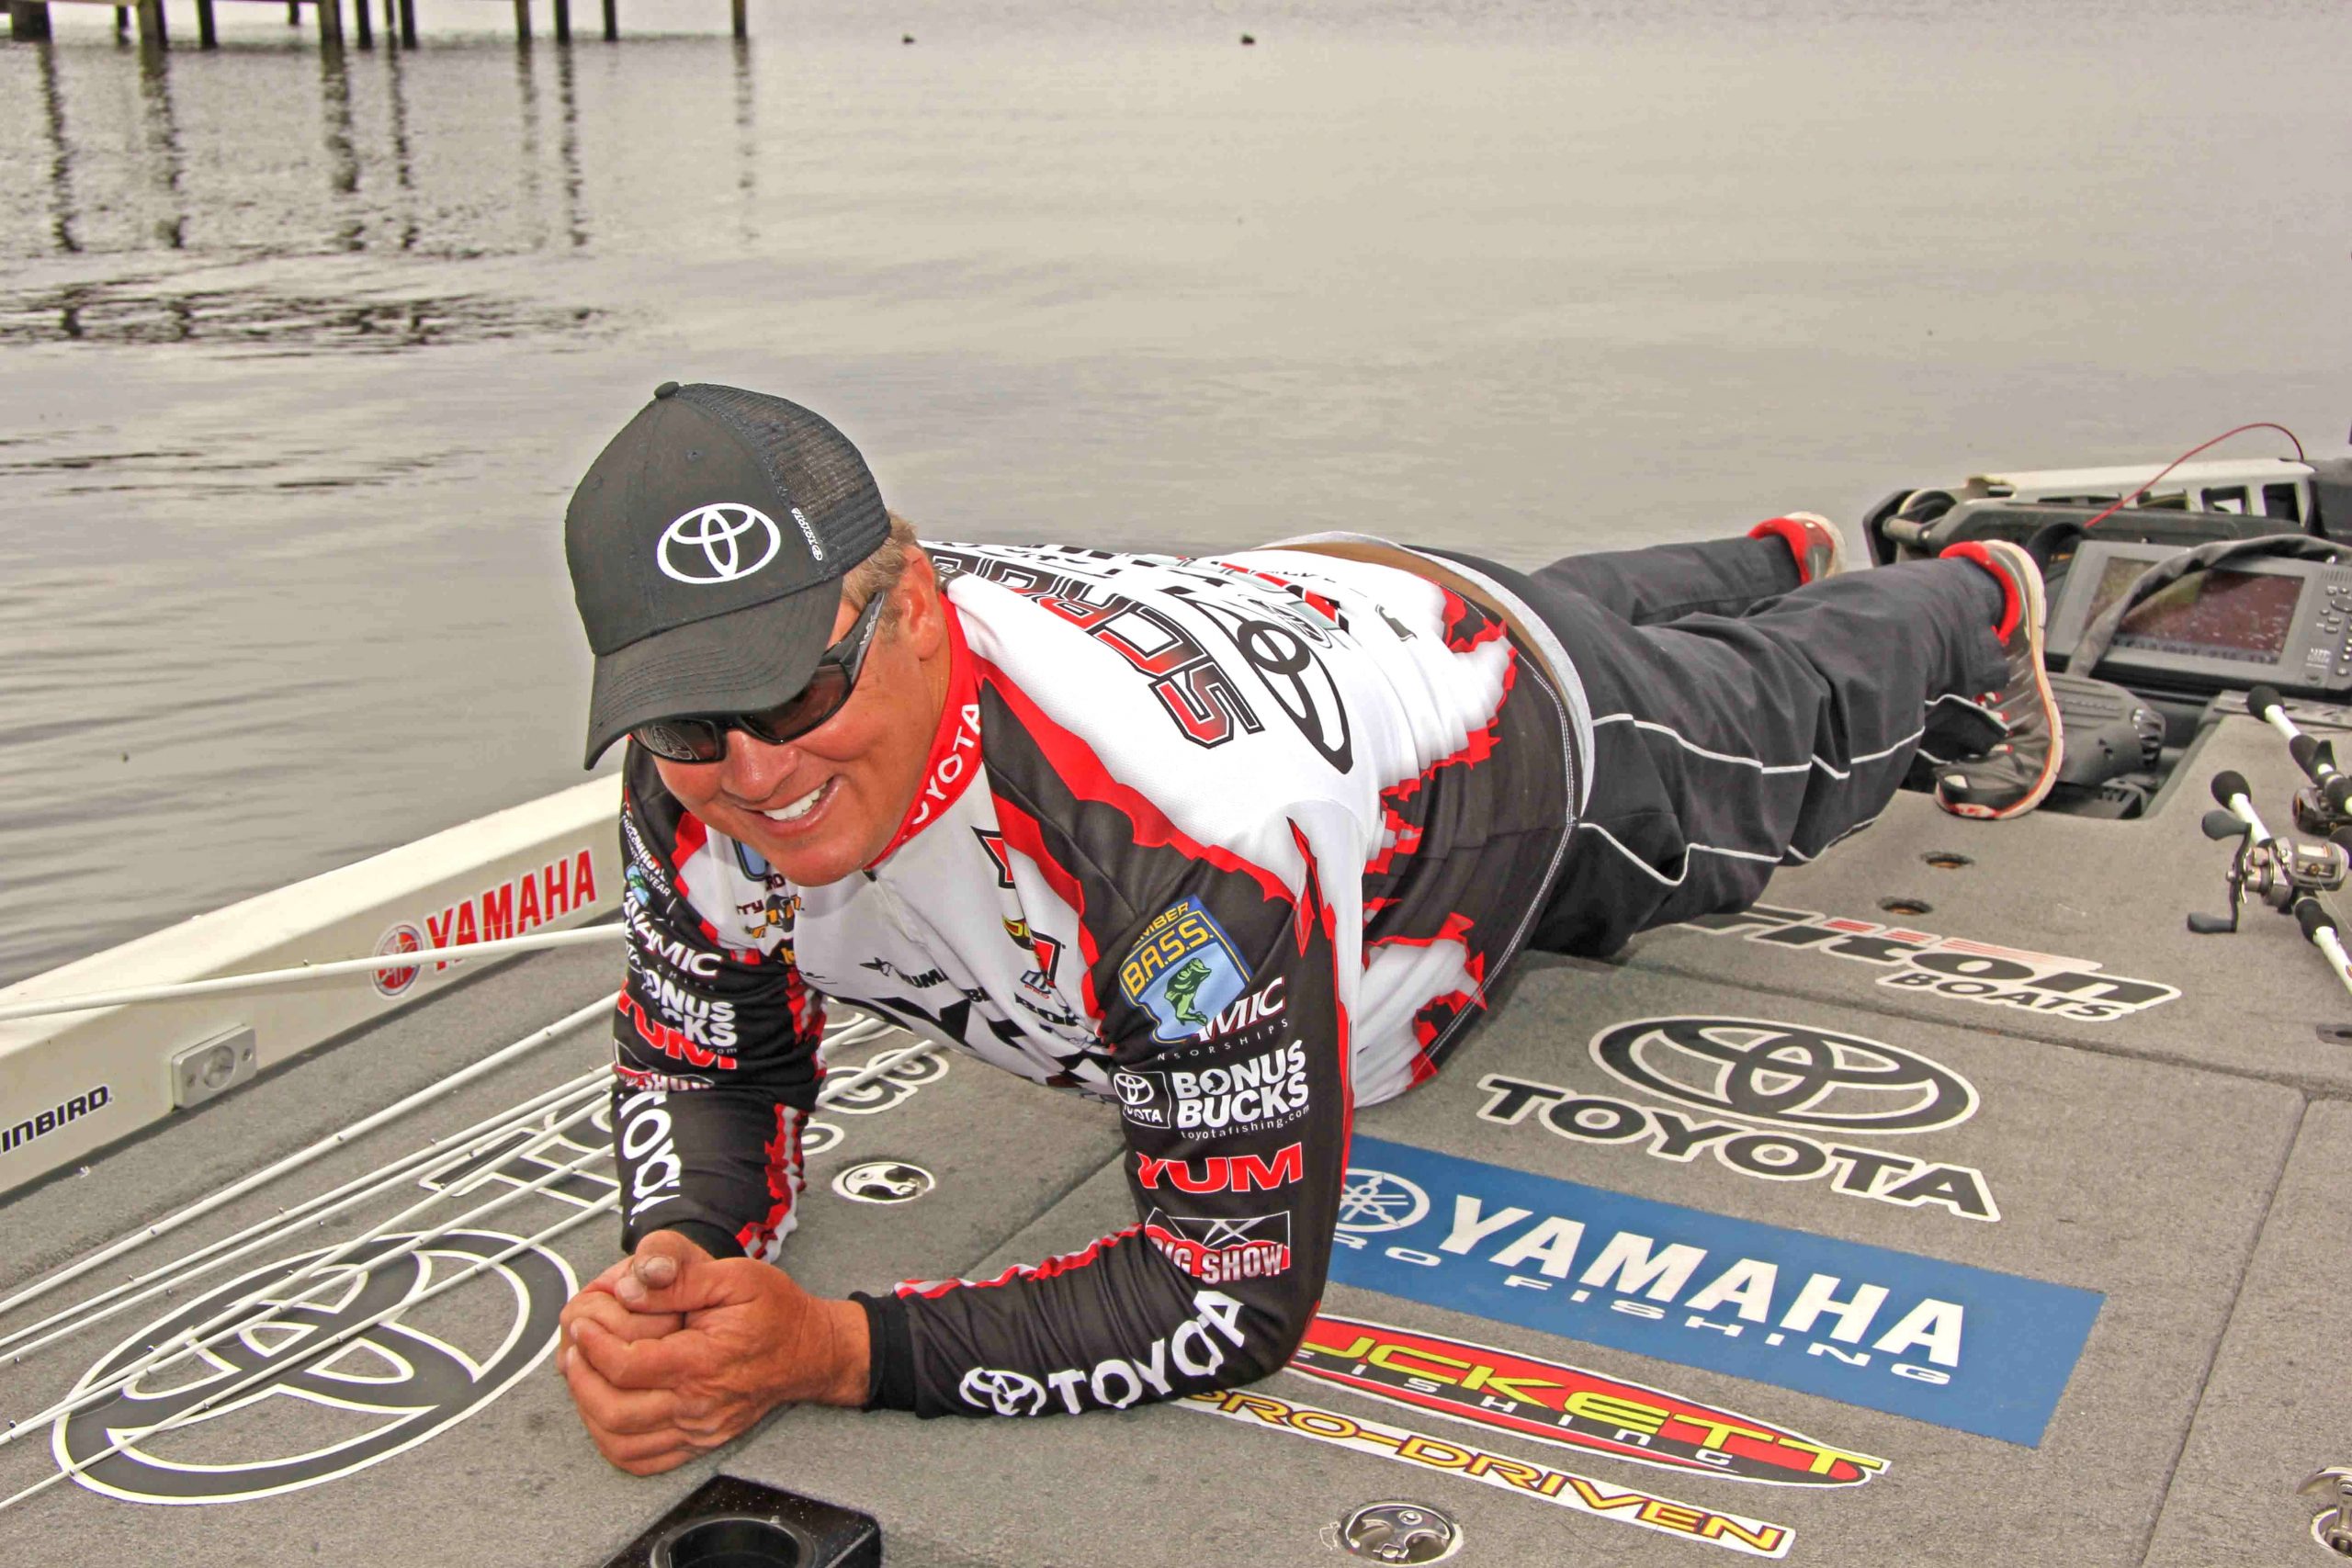 <b>FOUR</b> things you may not know about Scroggins: 1) He can perform an isometric abdominal plank exercise for at least three consecutive minutes; 2) Prior to becoming a pro angler, he painted cars and drove a tow truck for 15 years; 3) He likes to fish with spinning tackle equally as much as baitcasting equipment; 4) He has two beautiful blonde-headed grandchildren.